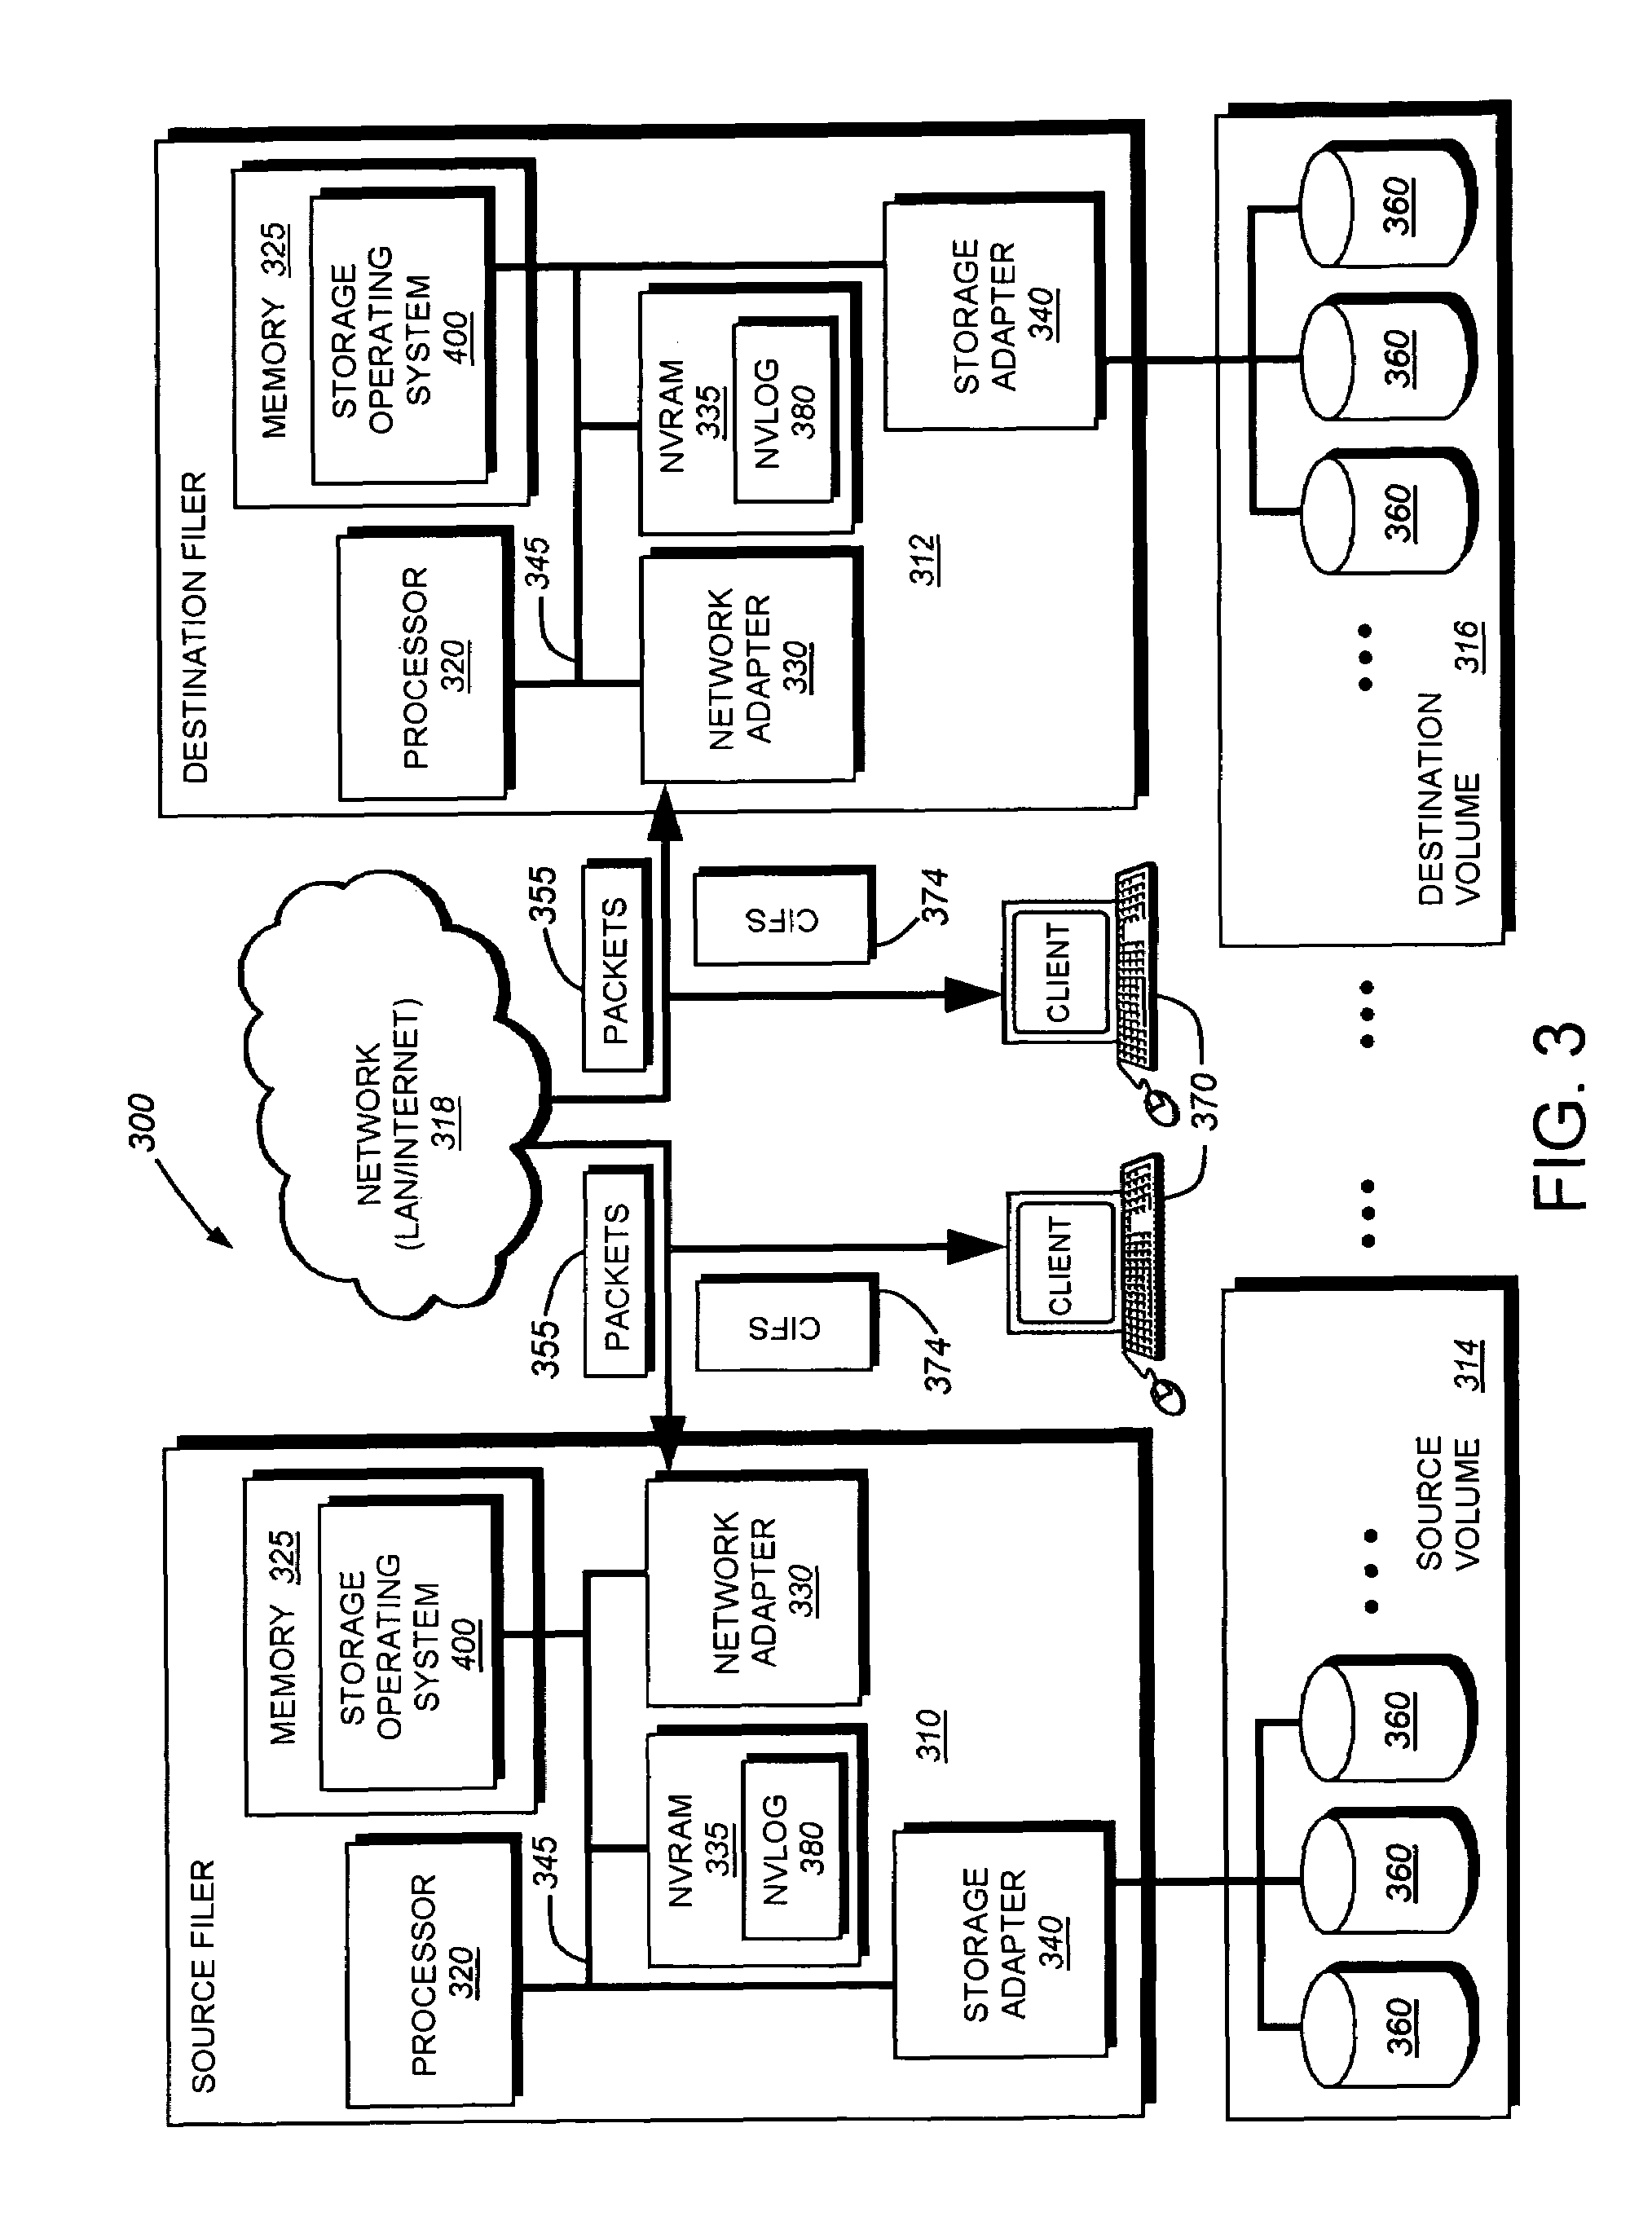 System and method for determining changes in two snapshots and for transmitting changes to a destination snapshot